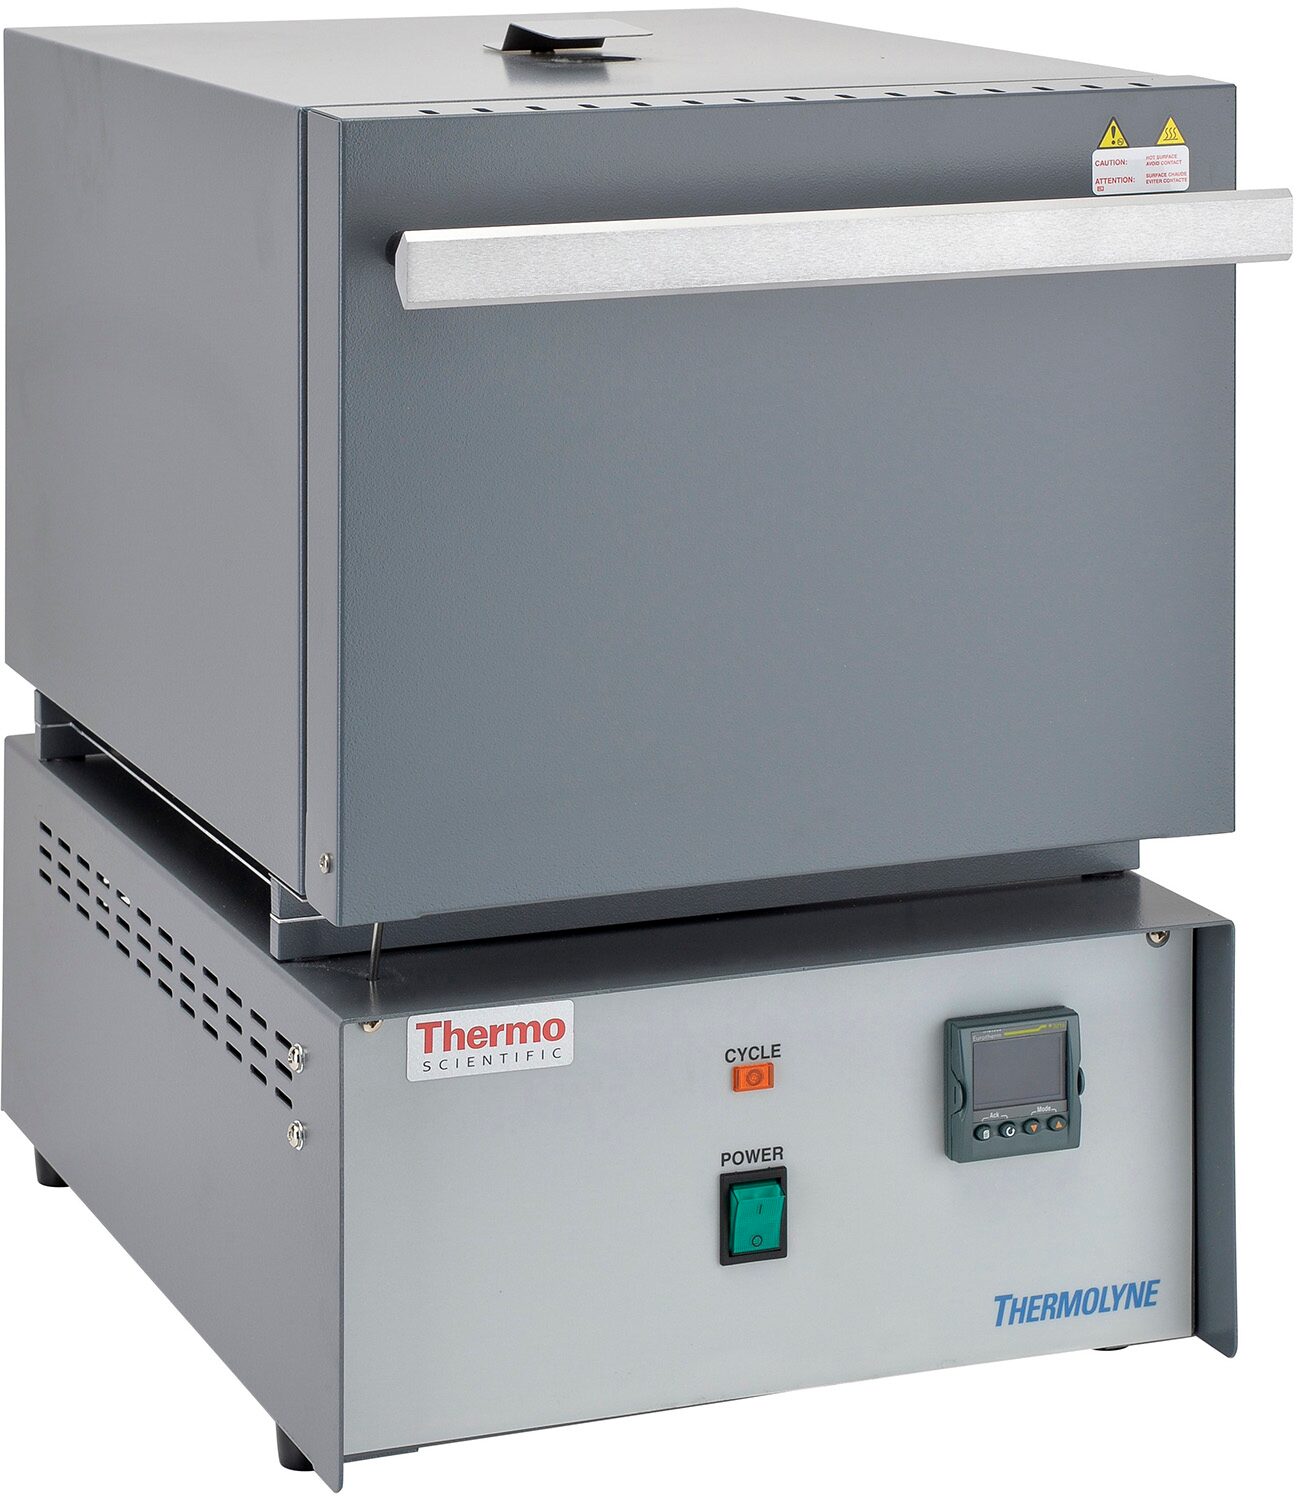 Thermo Scientific Thermolyne Benchtop Muffle Furnace